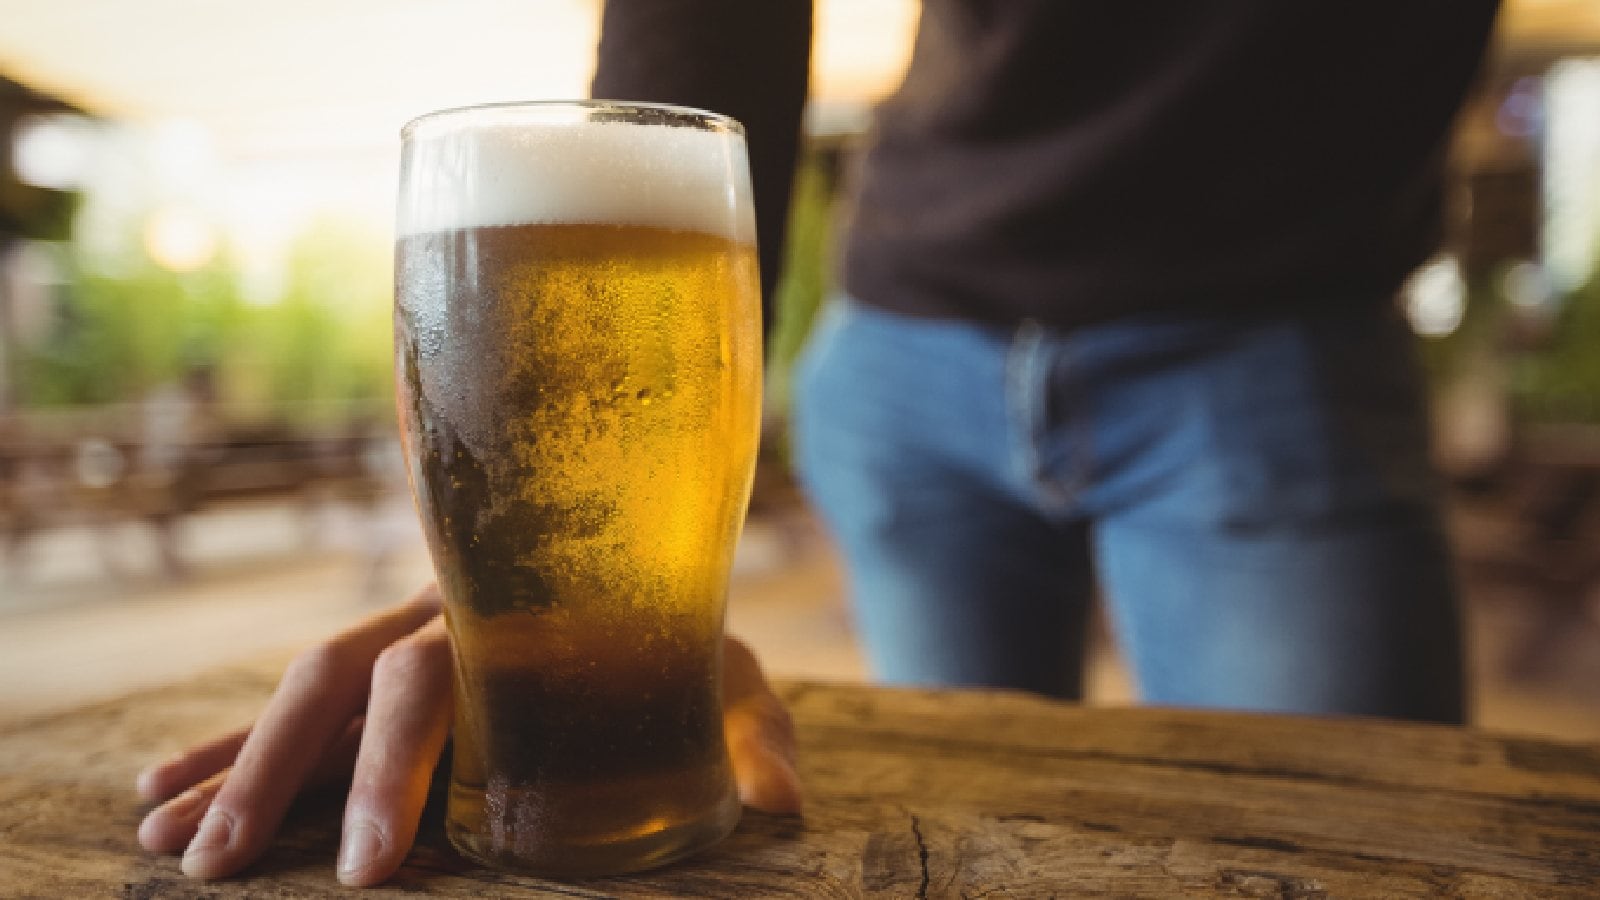 6 ways to get rid of beer belly without giving up beer